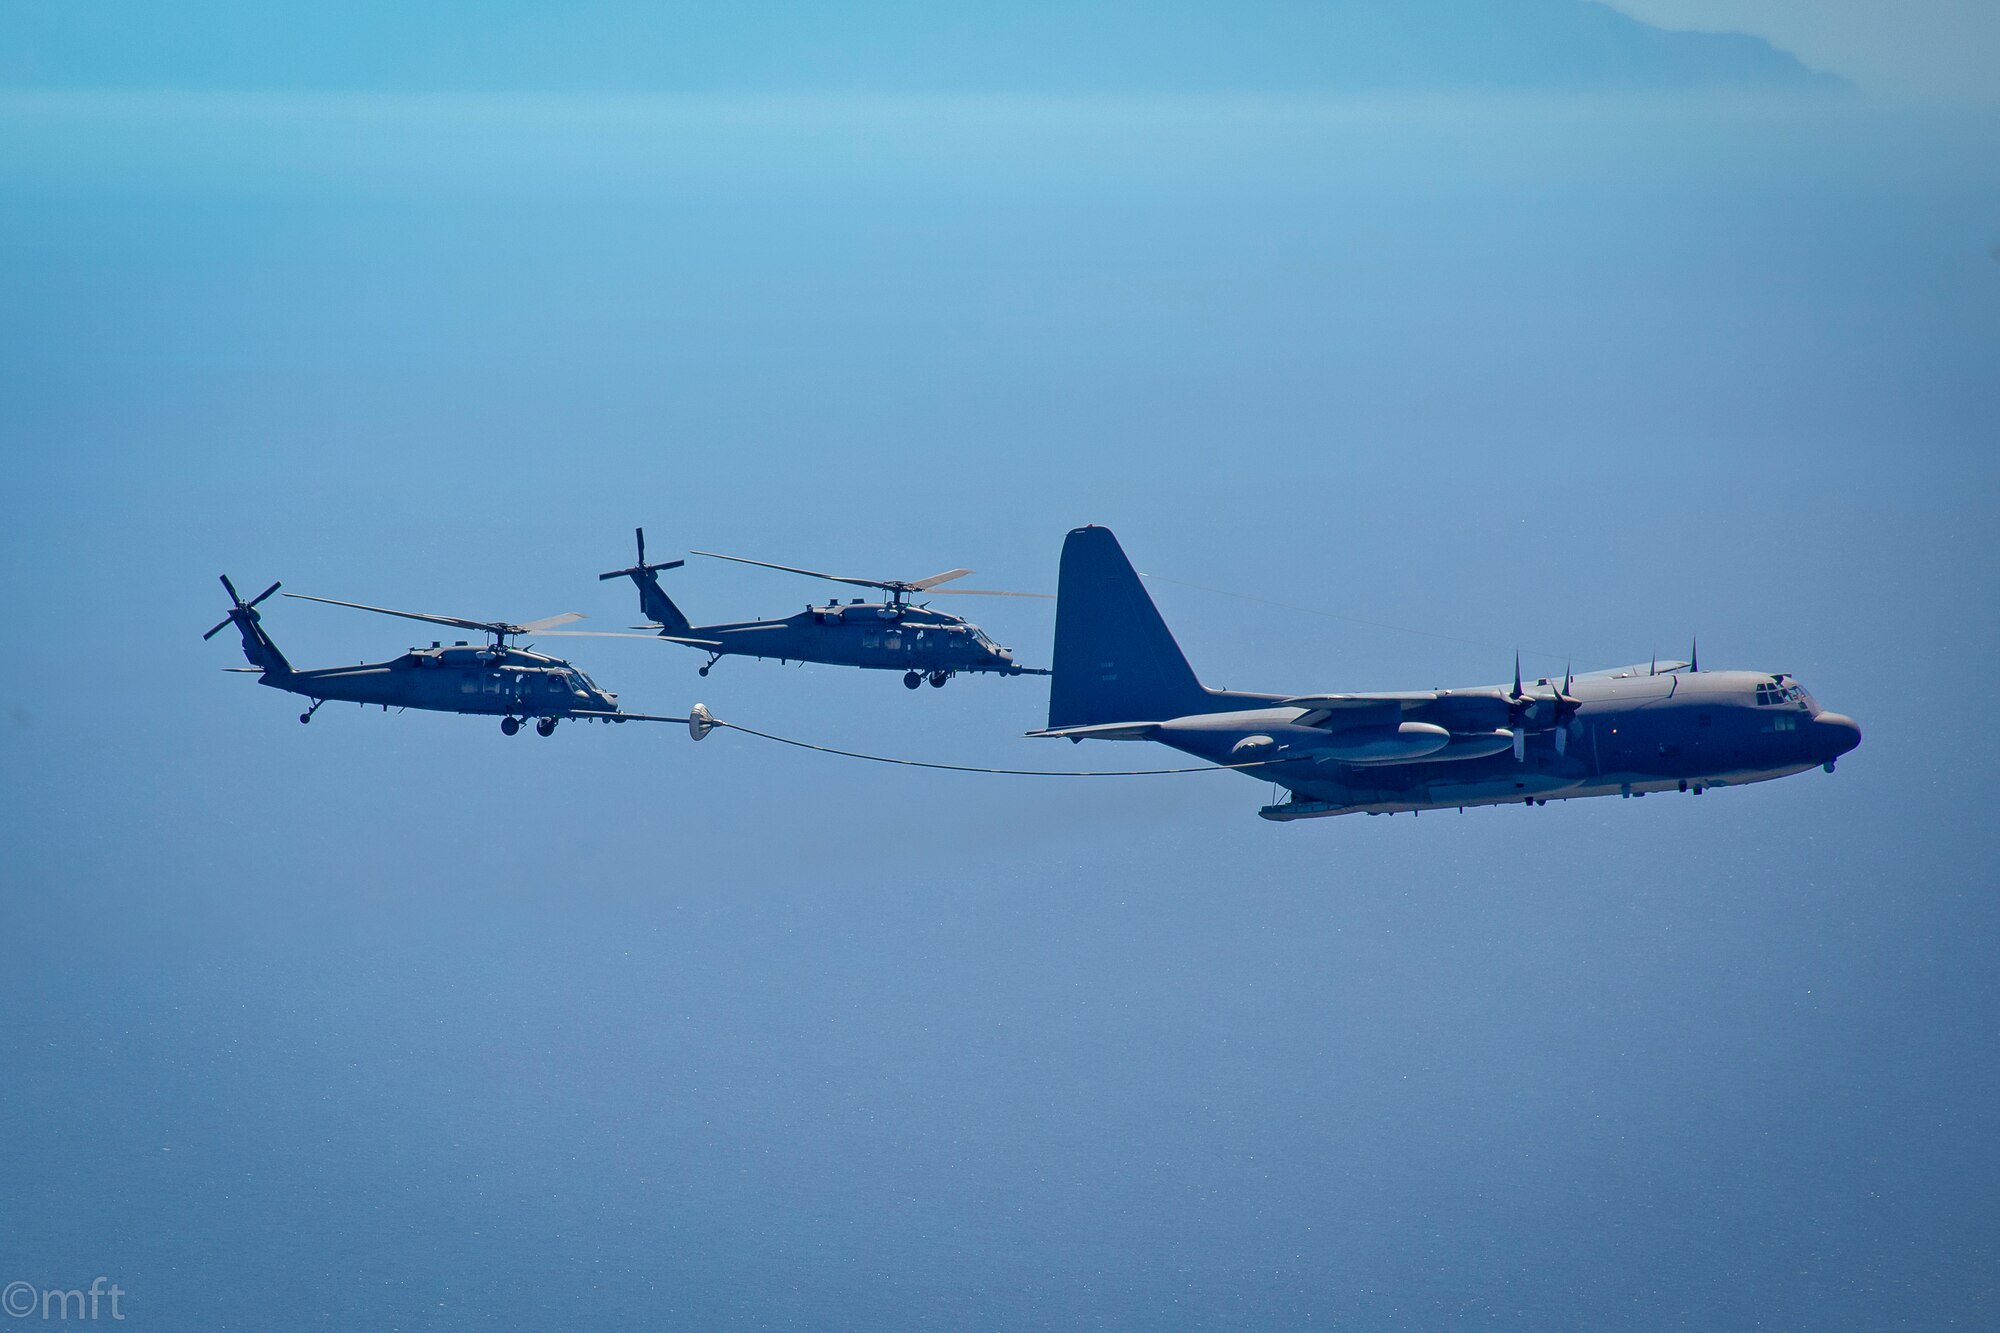 Two HH-60G Pave Hawk rescue helicopter and an MC-130P Combat Shadow aircraft, assigned with the 129th Rescue Wing, California Air National Guard, conduct an aerial refuel operations over the pacific ocean, April 3, 2014.  (Courtesy photo by Master Sgt. Miguel Toro/released)